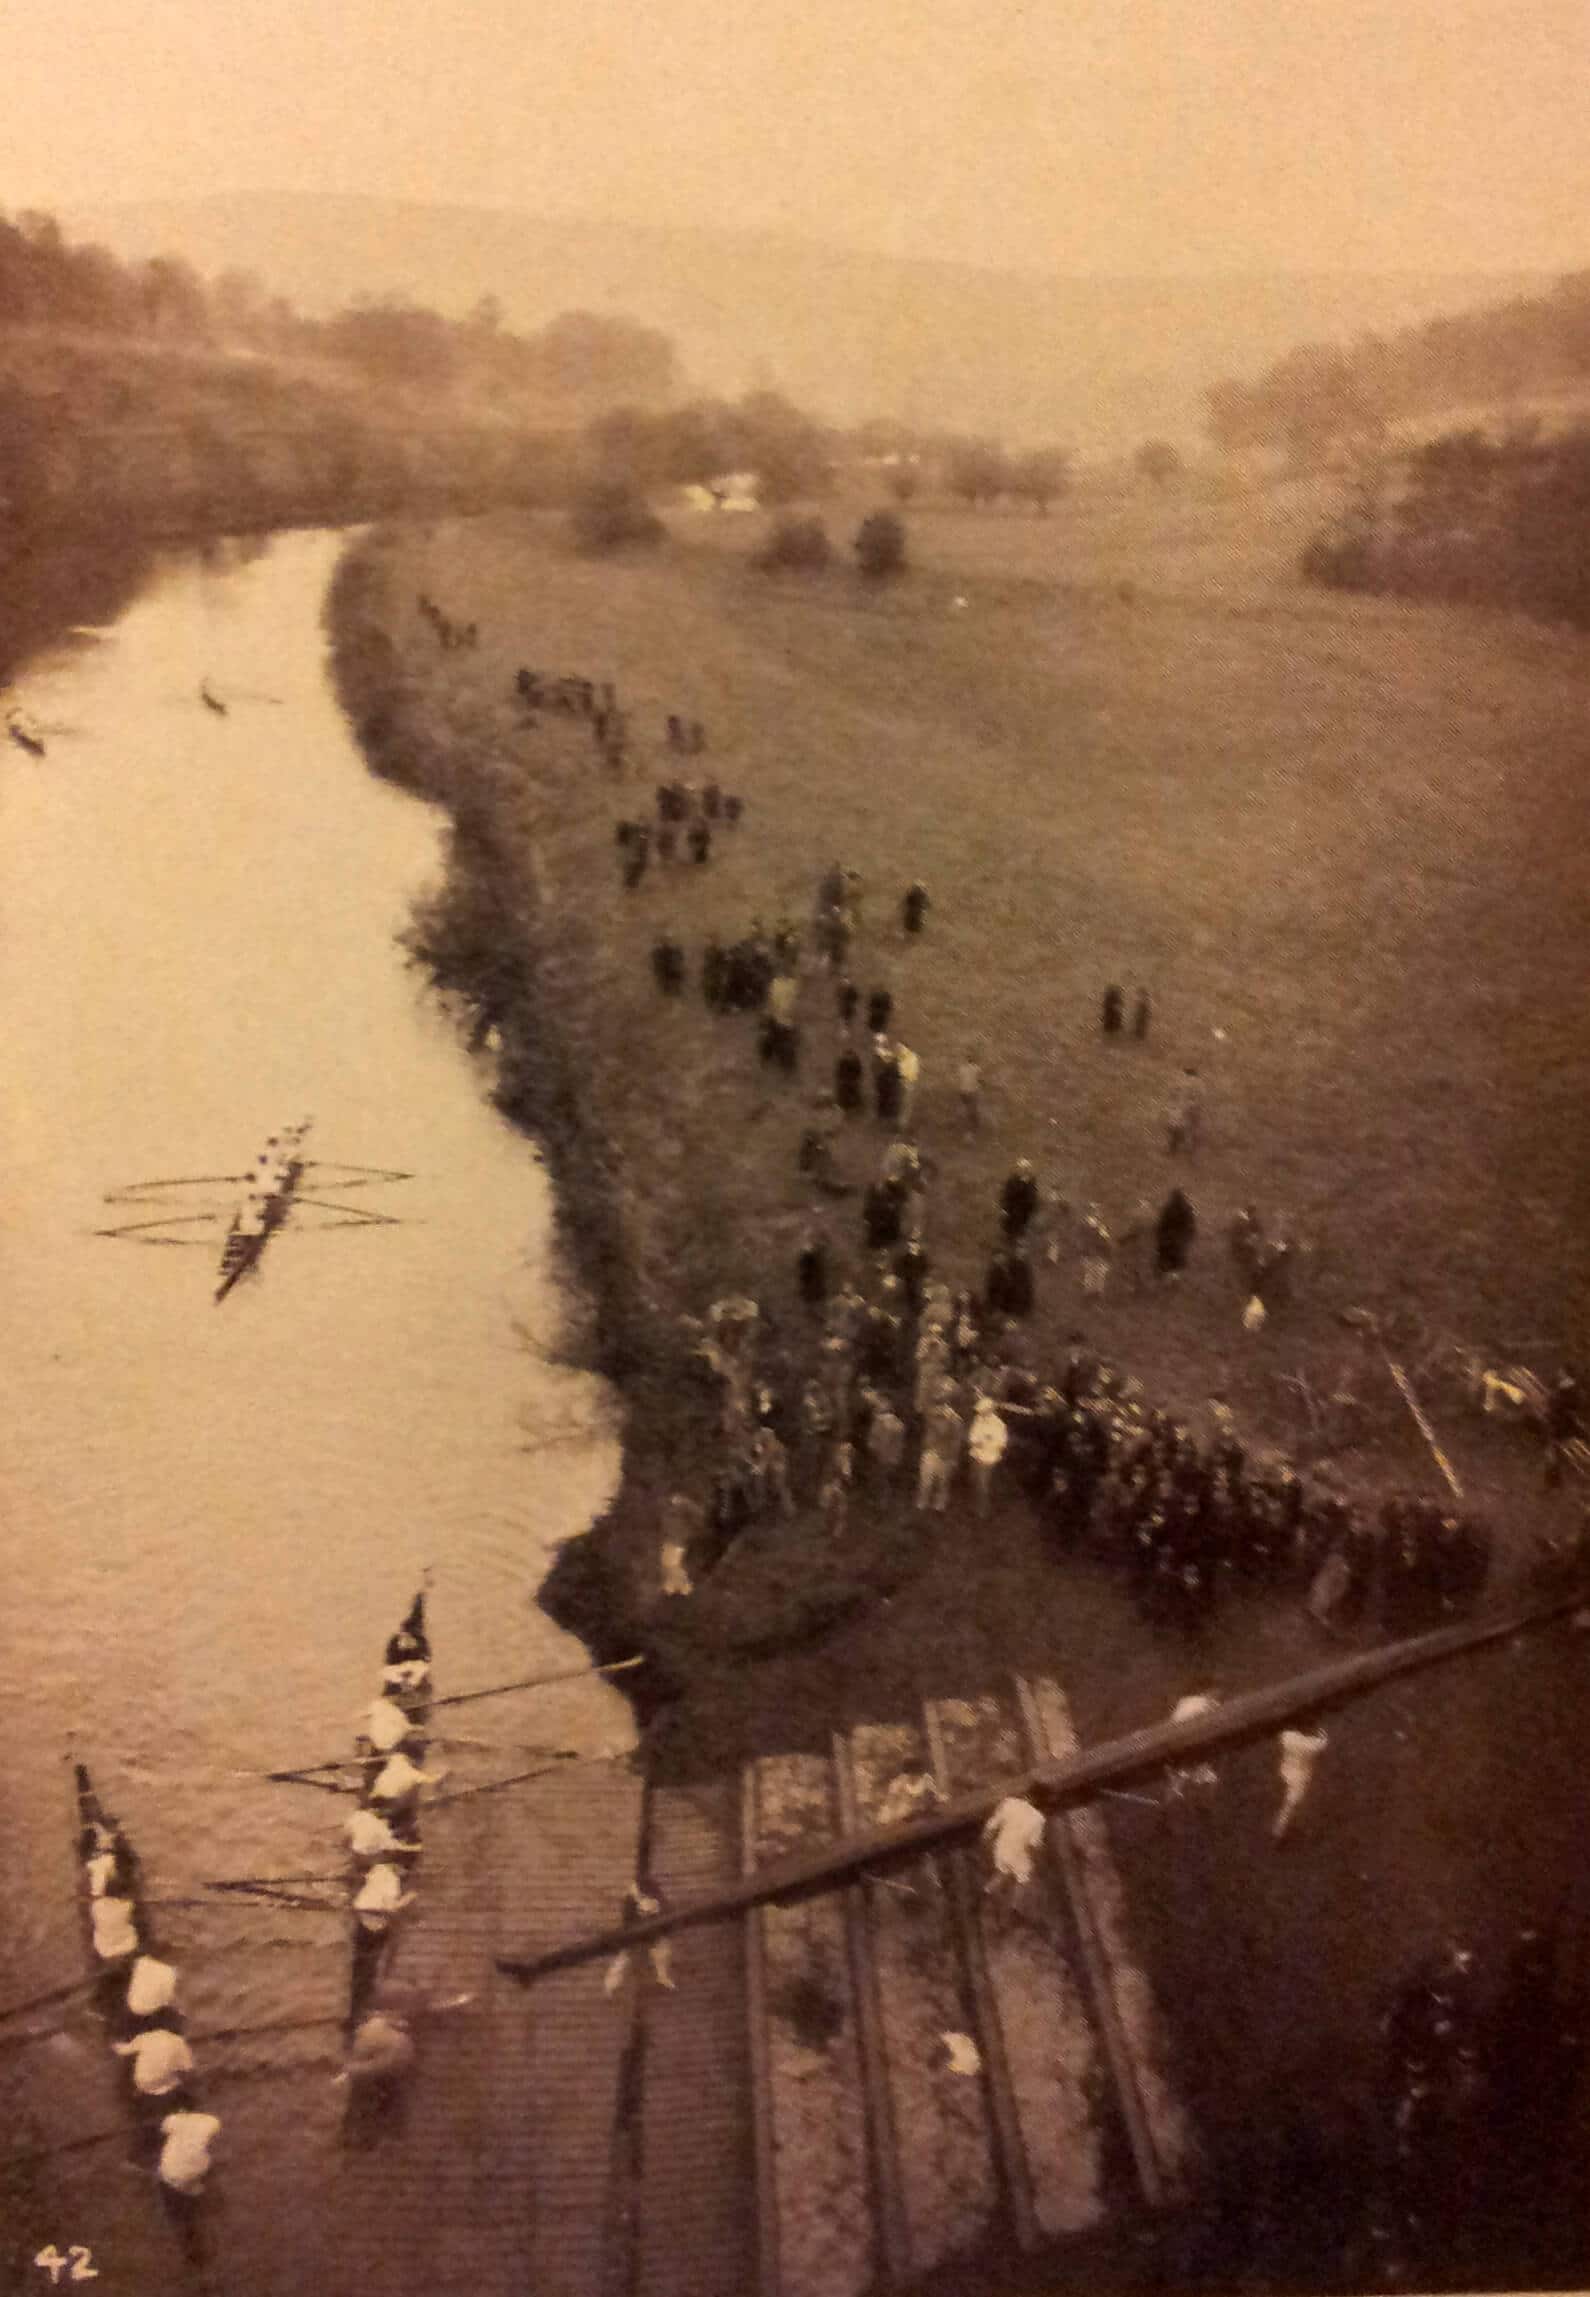 Monkton Combe school rowing about 1930